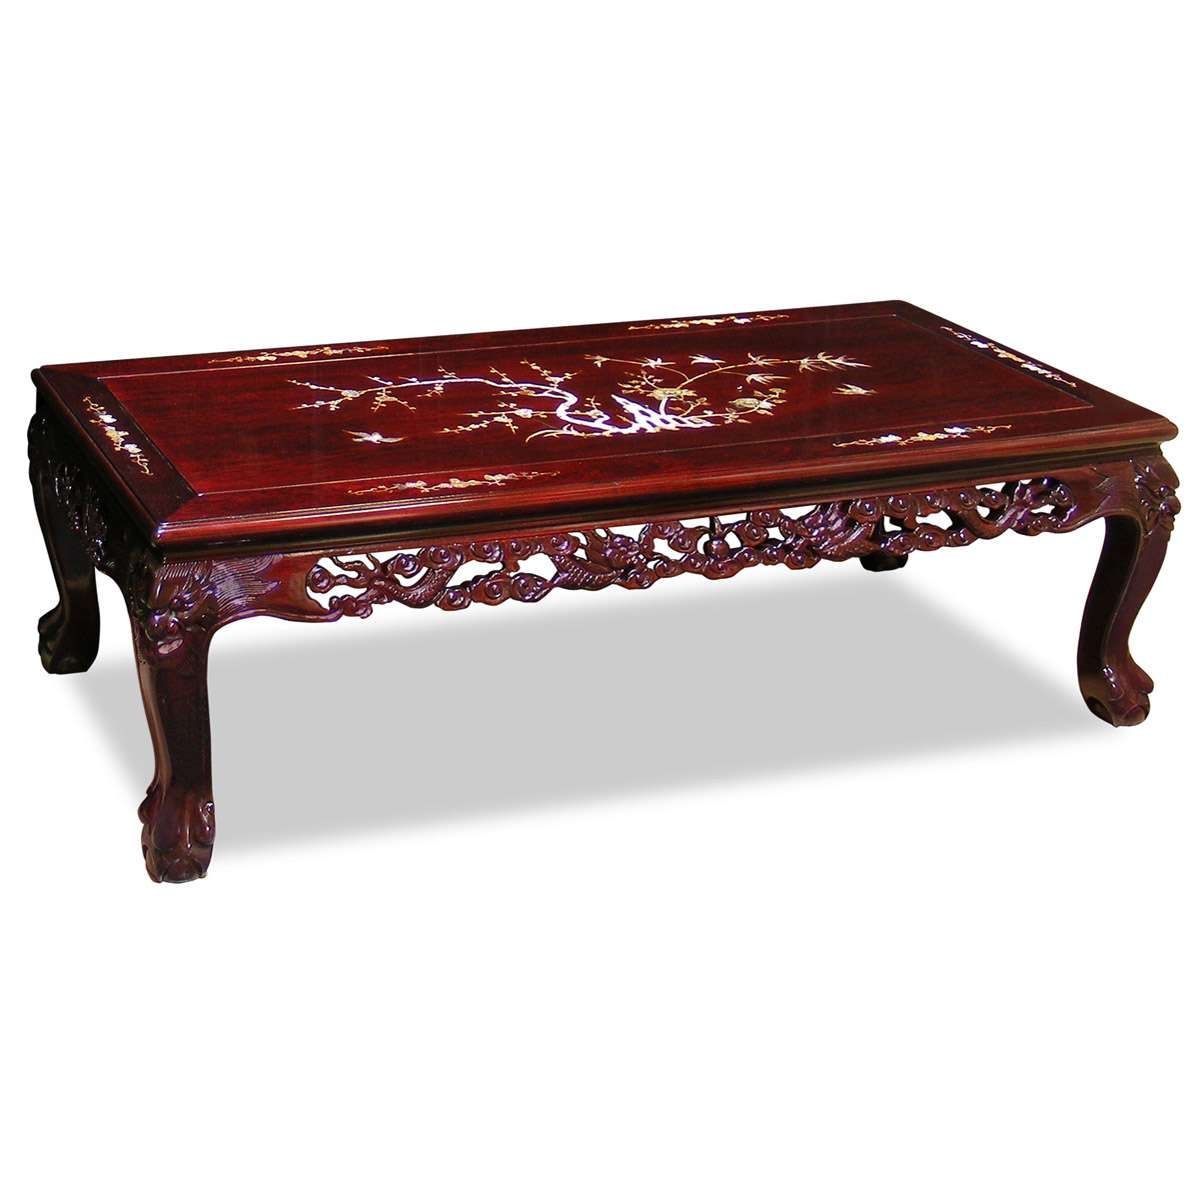 Imperial Mother Of Pearl Motif Inlay Coffee Table Pertaining To Newest Mother Of Pearl Coffee Tables (View 5 of 20)